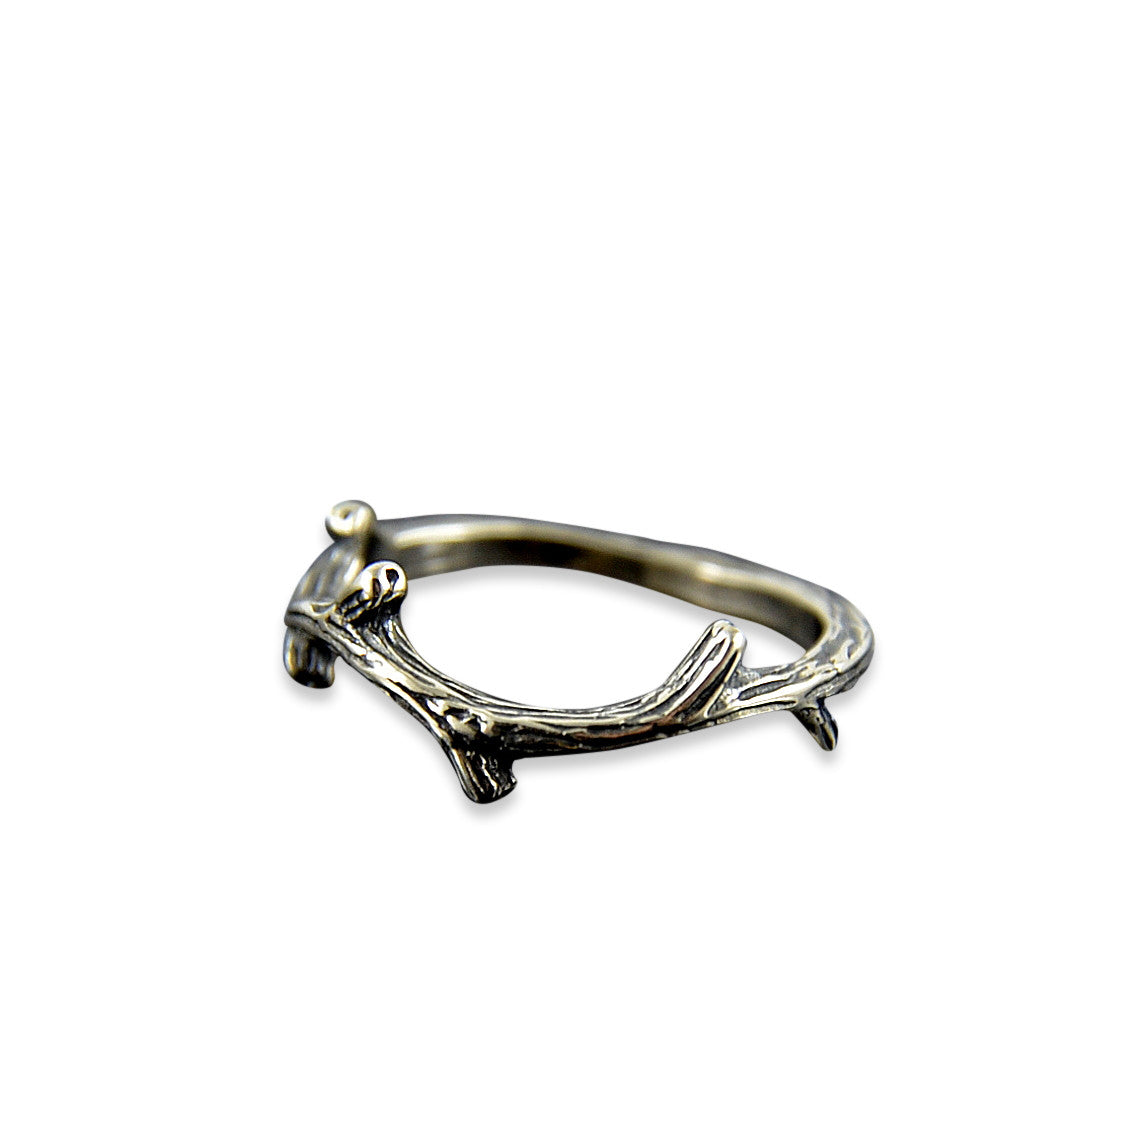 Twig Ring - Branch Ring - Crown of Thorns - Gwen Delicious Jewelry Designs